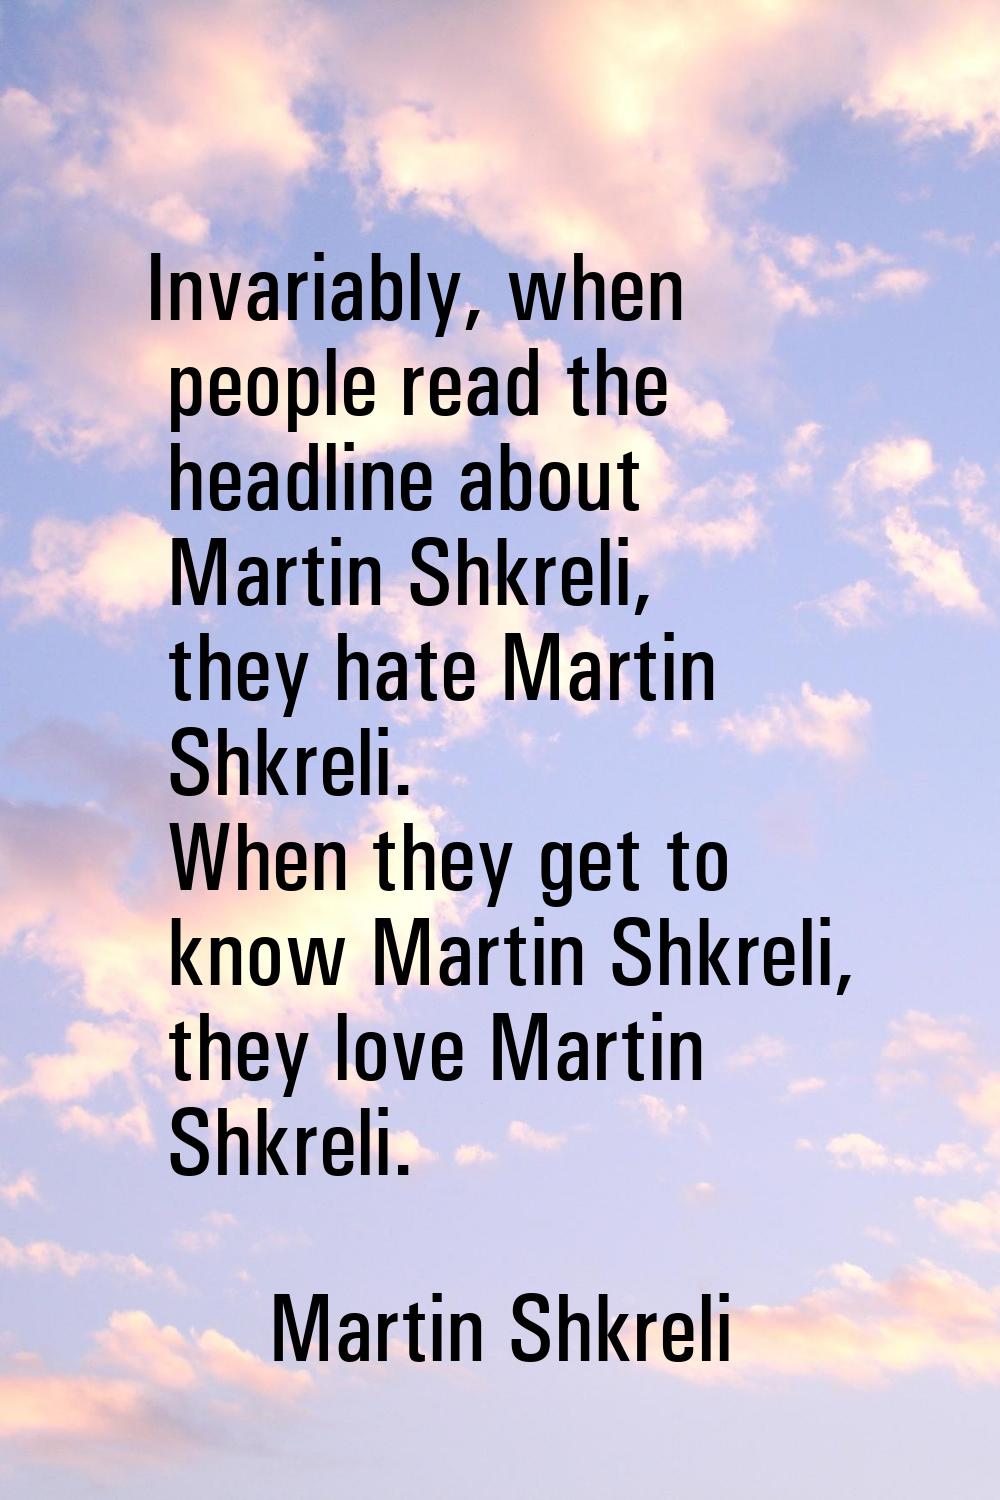 Invariably, when people read the headline about Martin Shkreli, they hate Martin Shkreli. When they